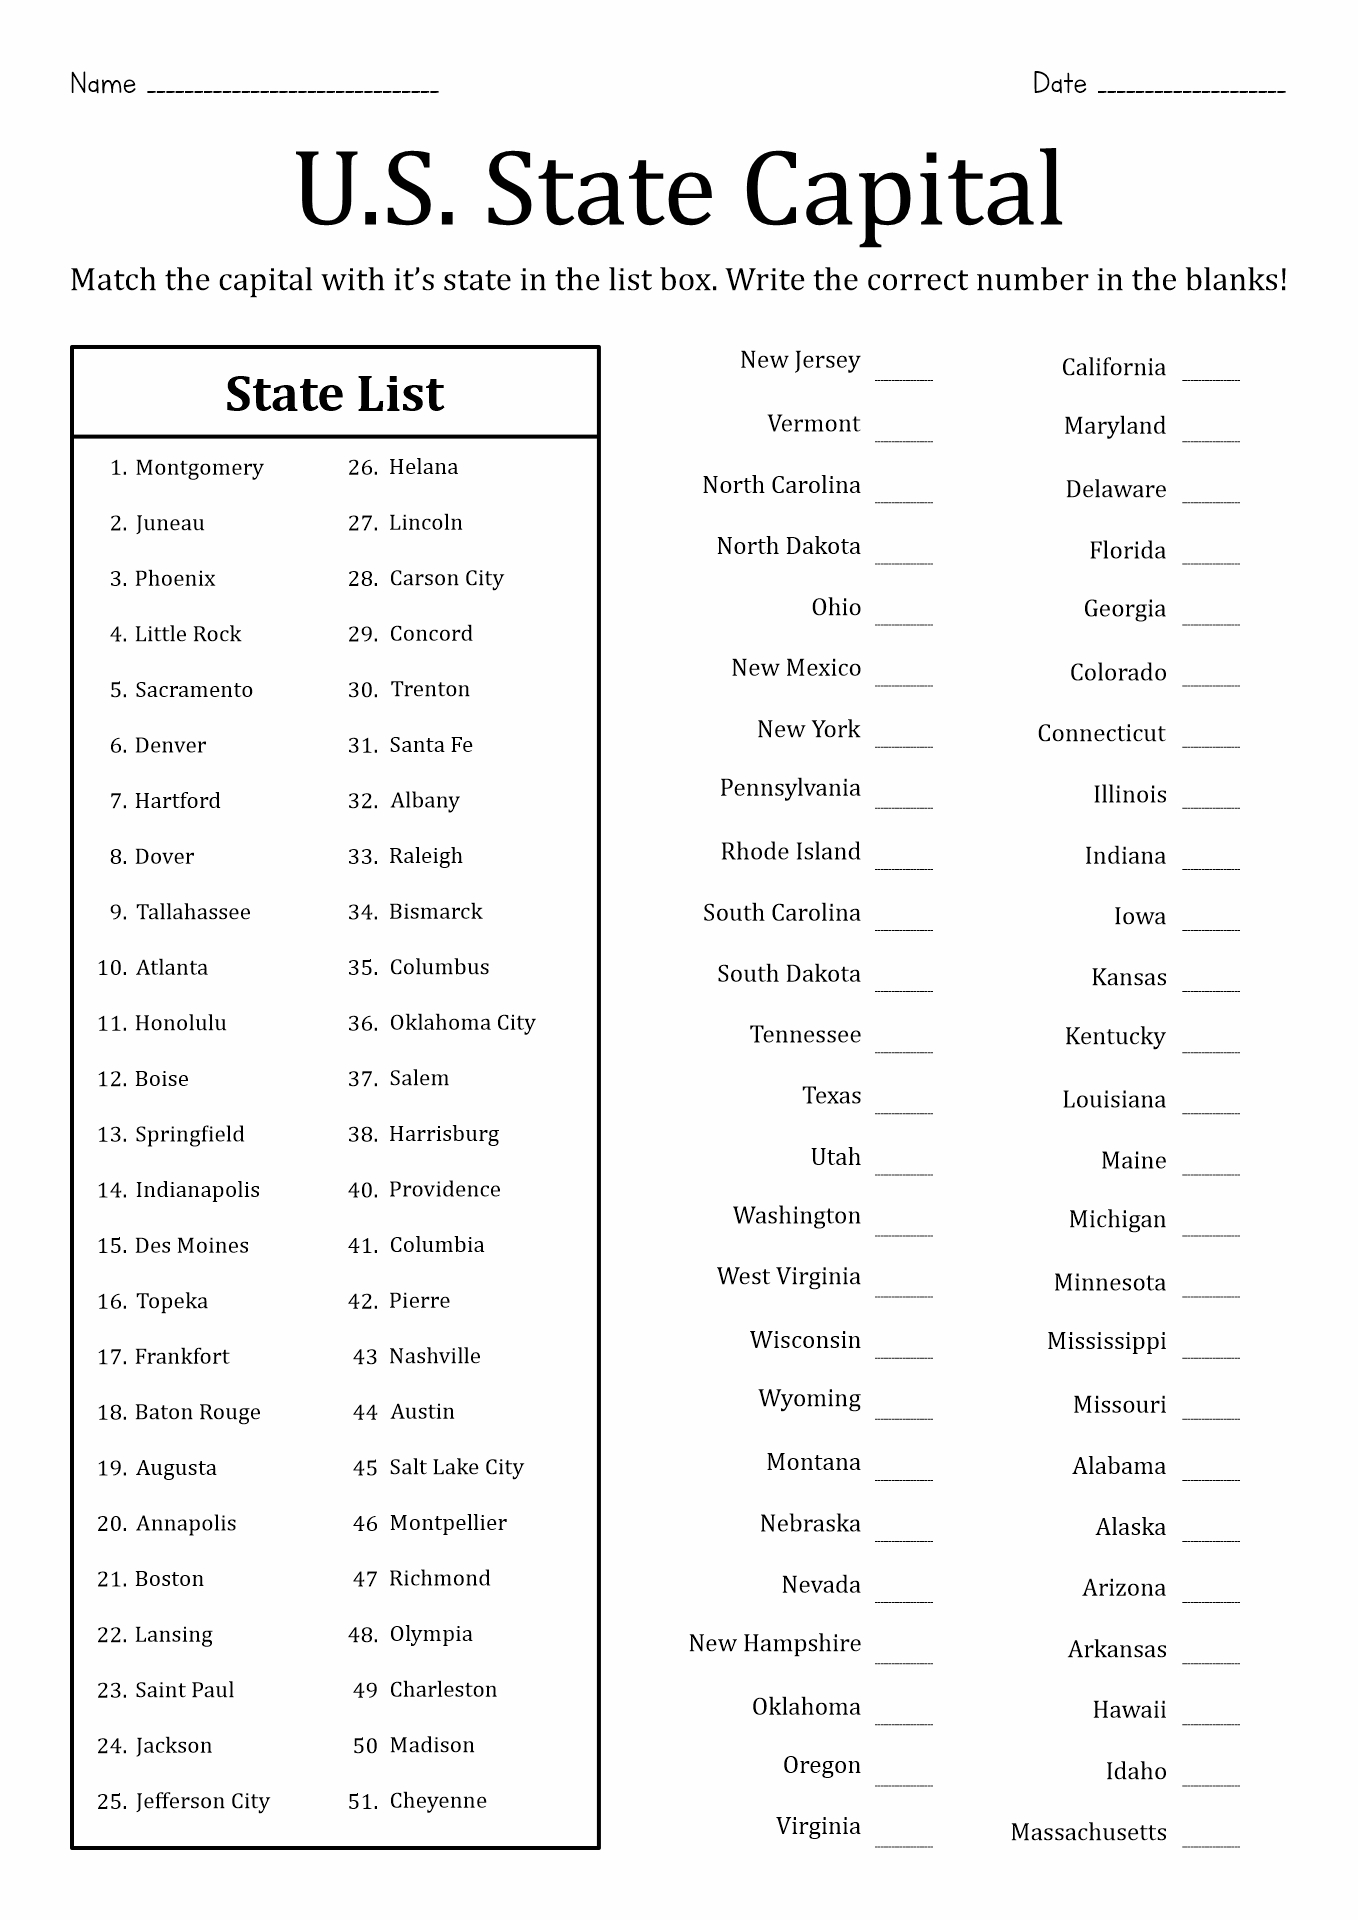 50 States And Capitals Printable Worksheets